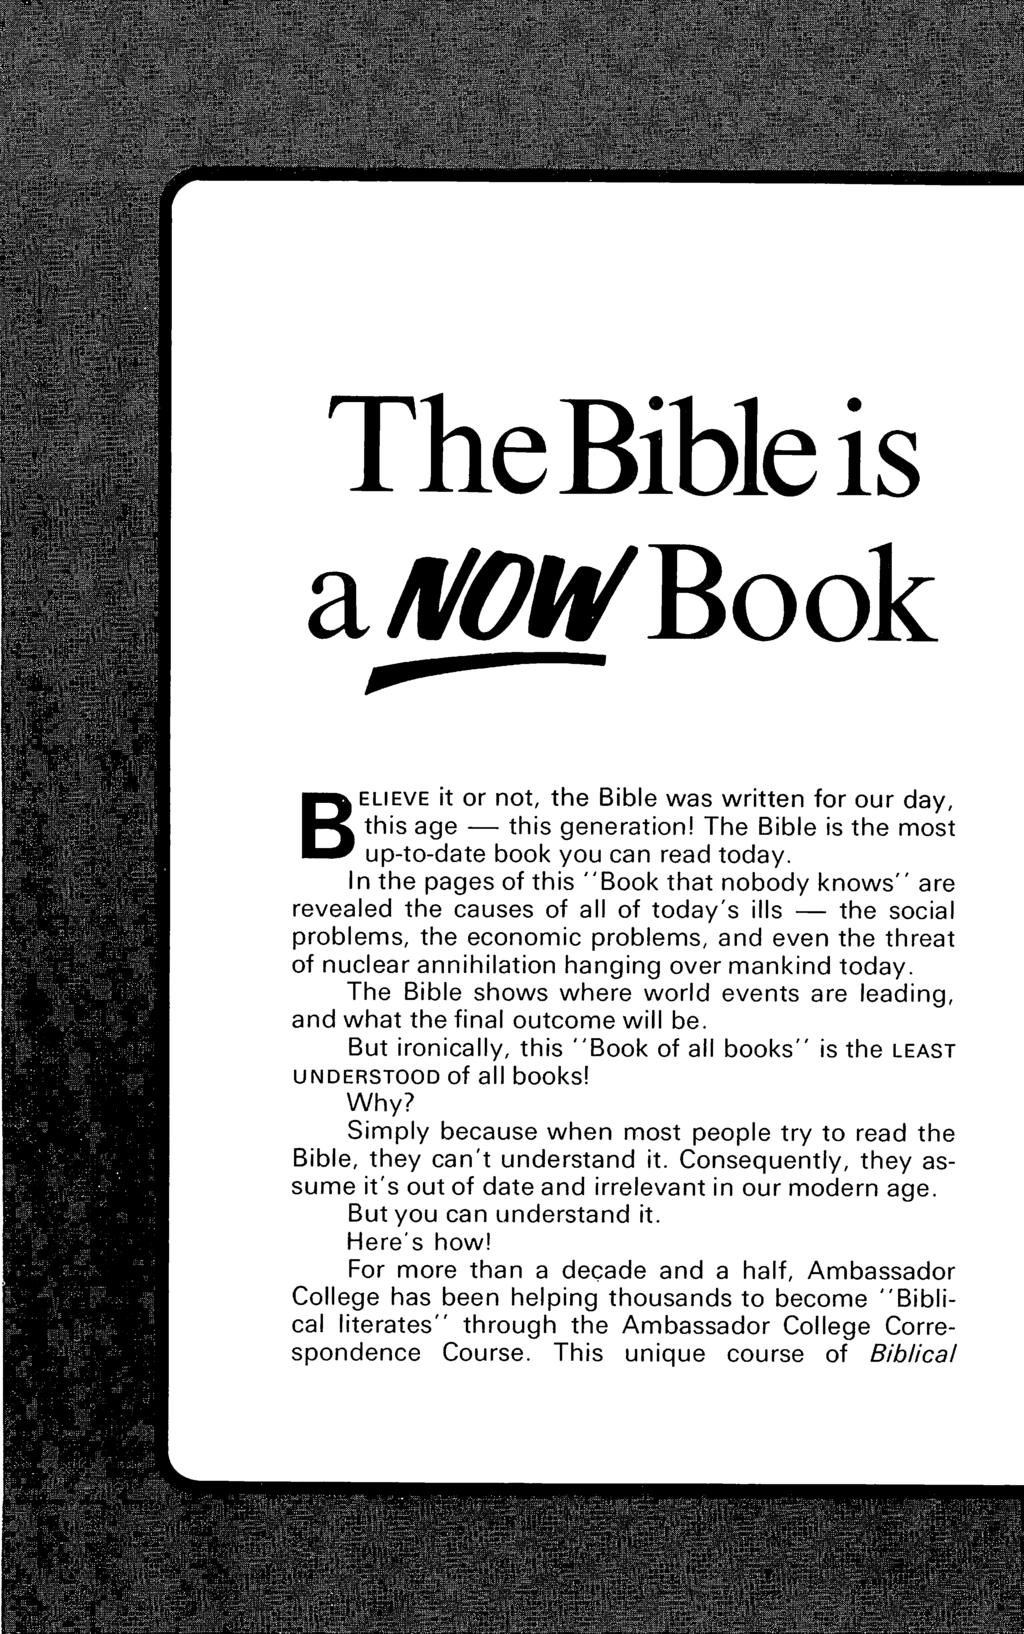 TheBible is a NOWBook p B ELI EV E it or not, the Bible was written for our day, this age - this generation' The Bible is the most up-to-date book you can read today.